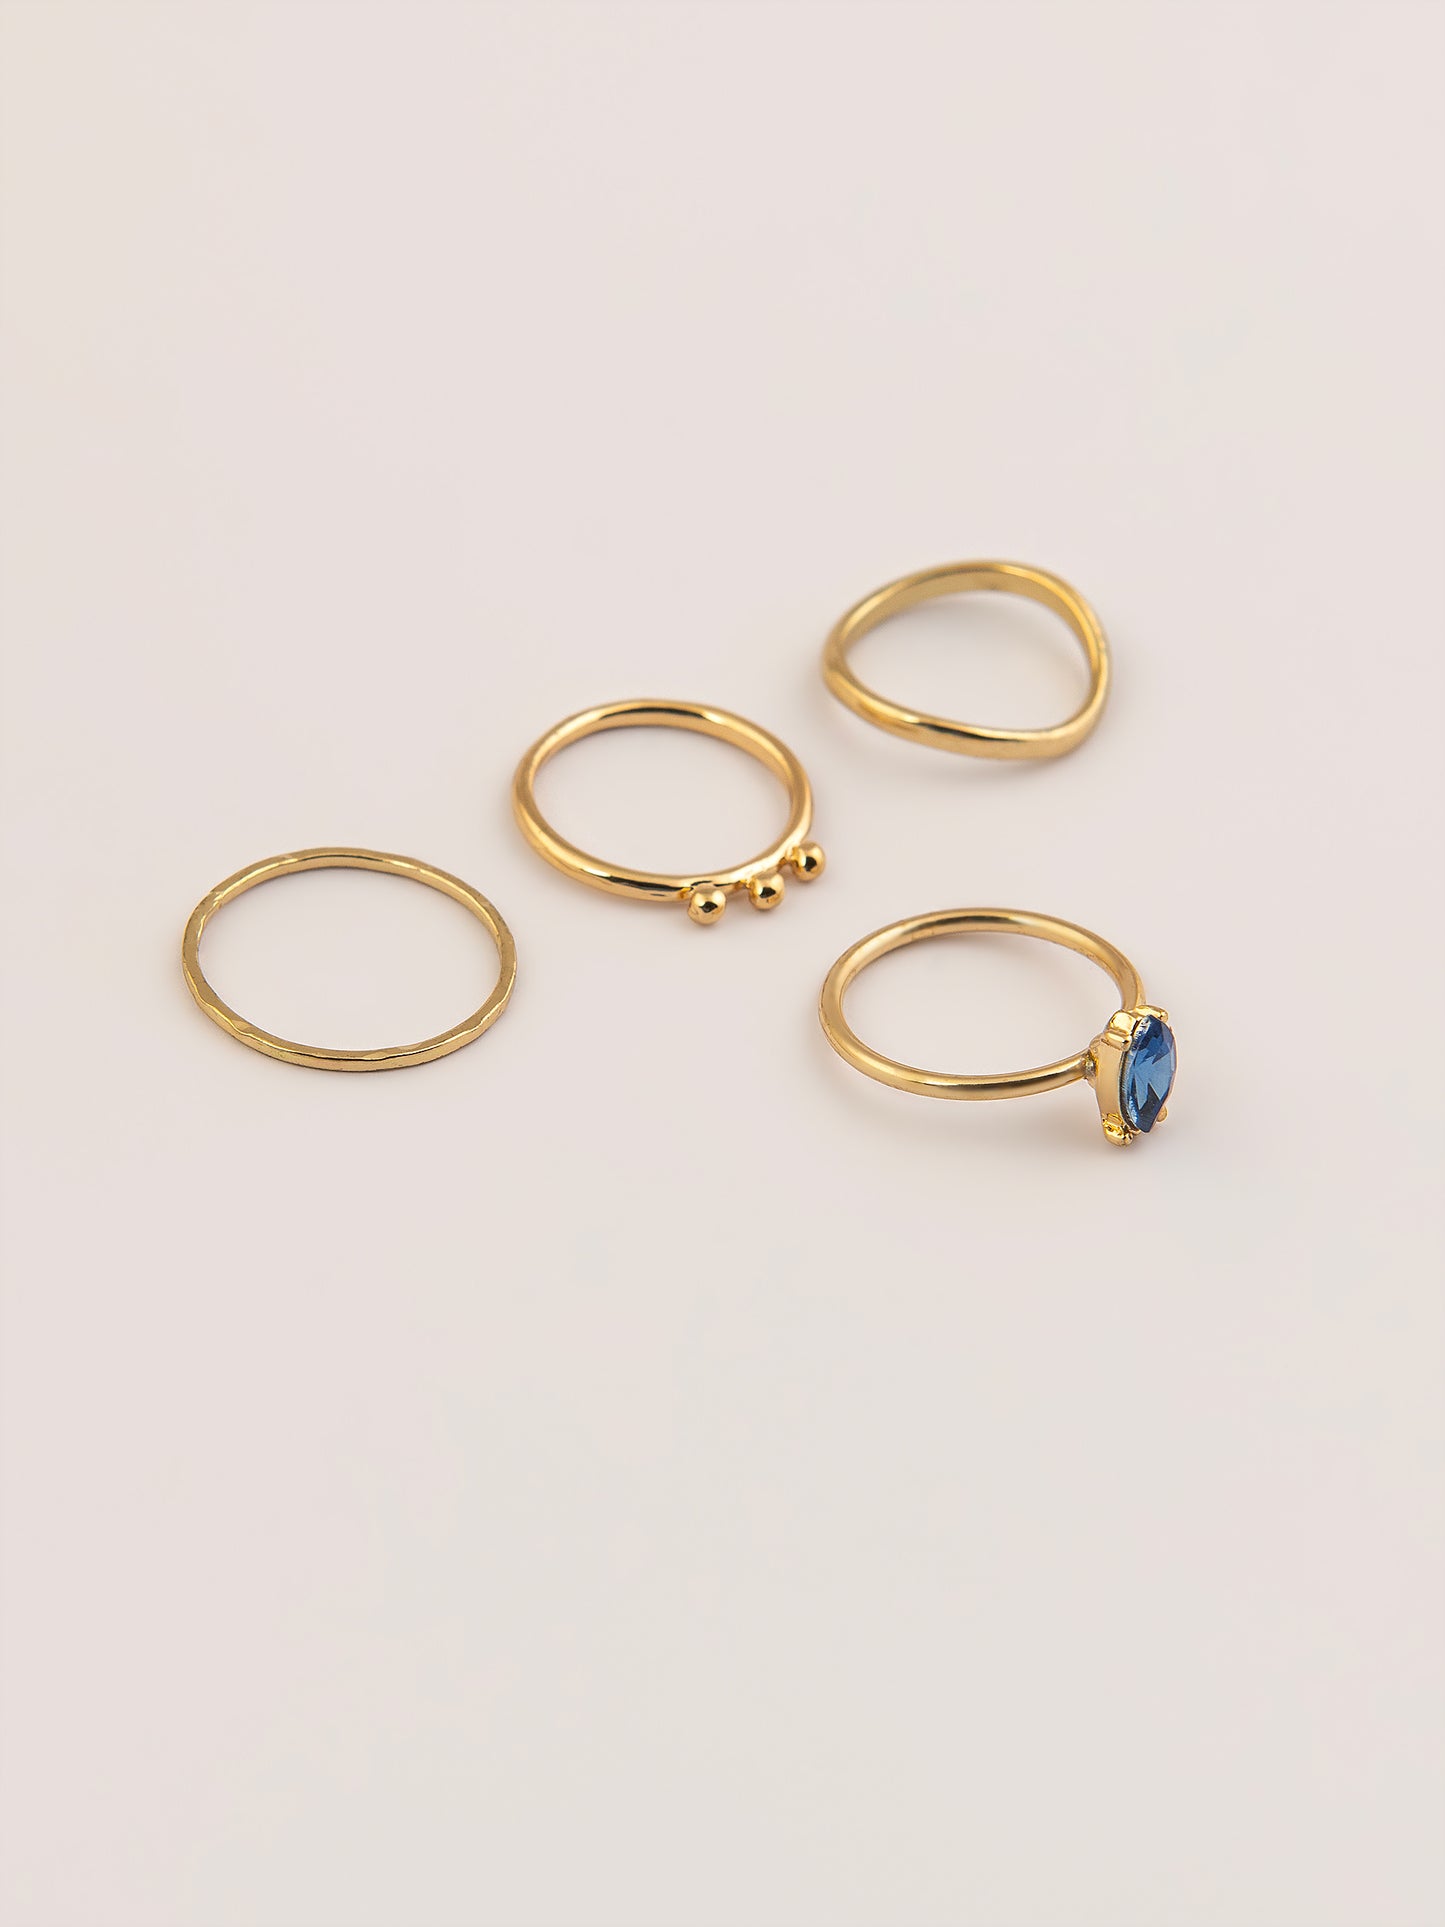 Contemporary Textured Rings Set